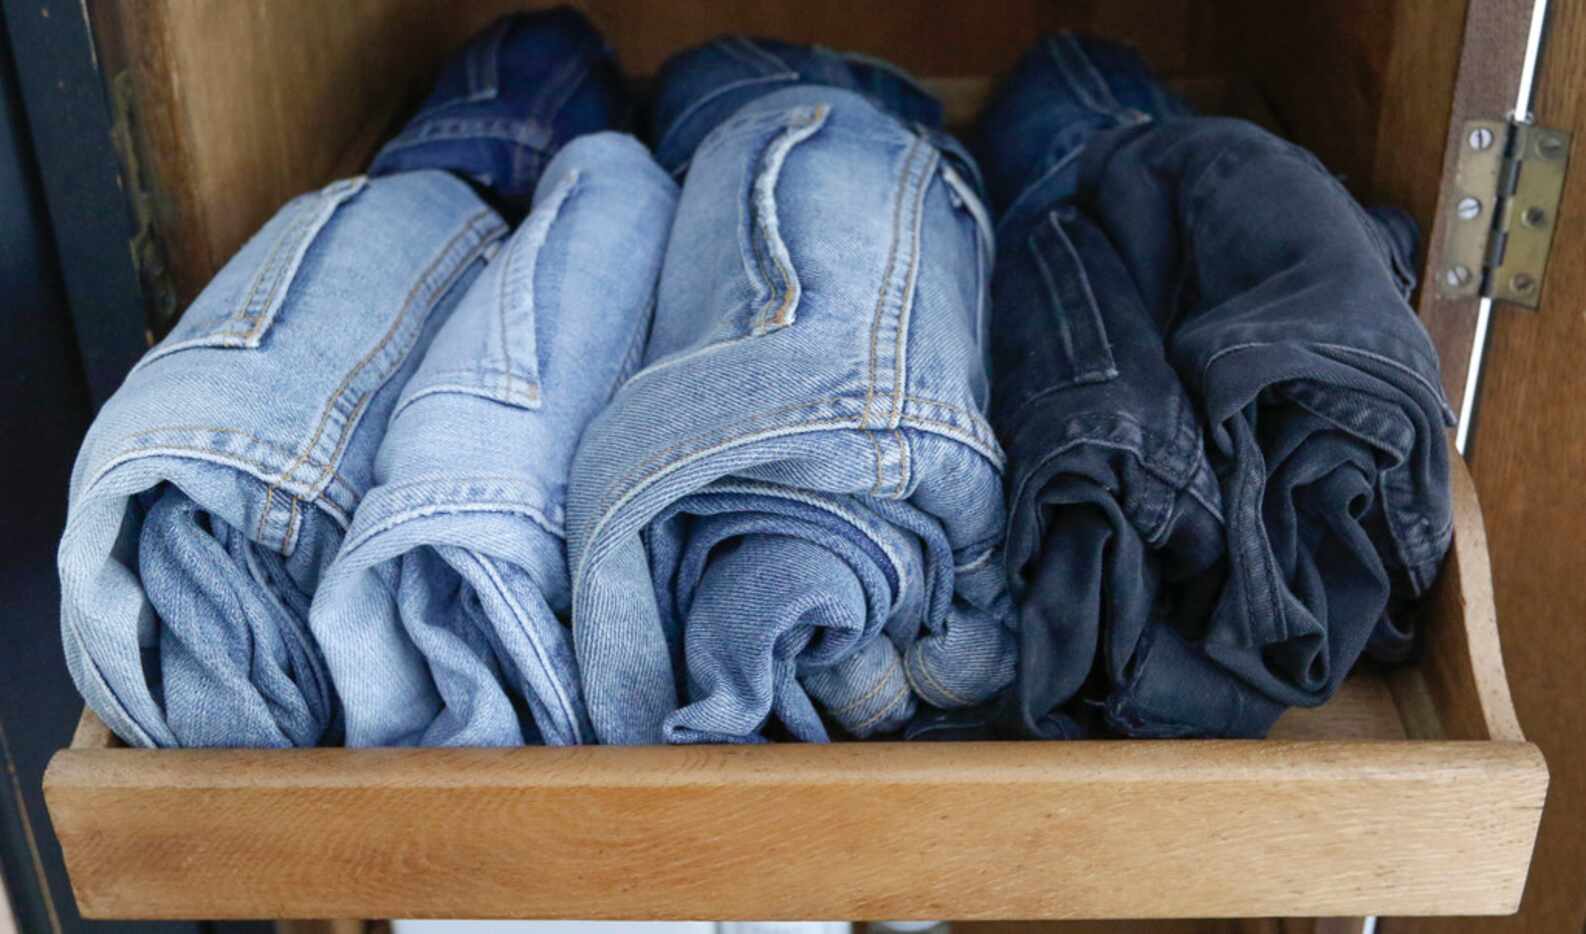 Caroline Rector's rolled jeans are packed neatly in a cubby and easy to see.